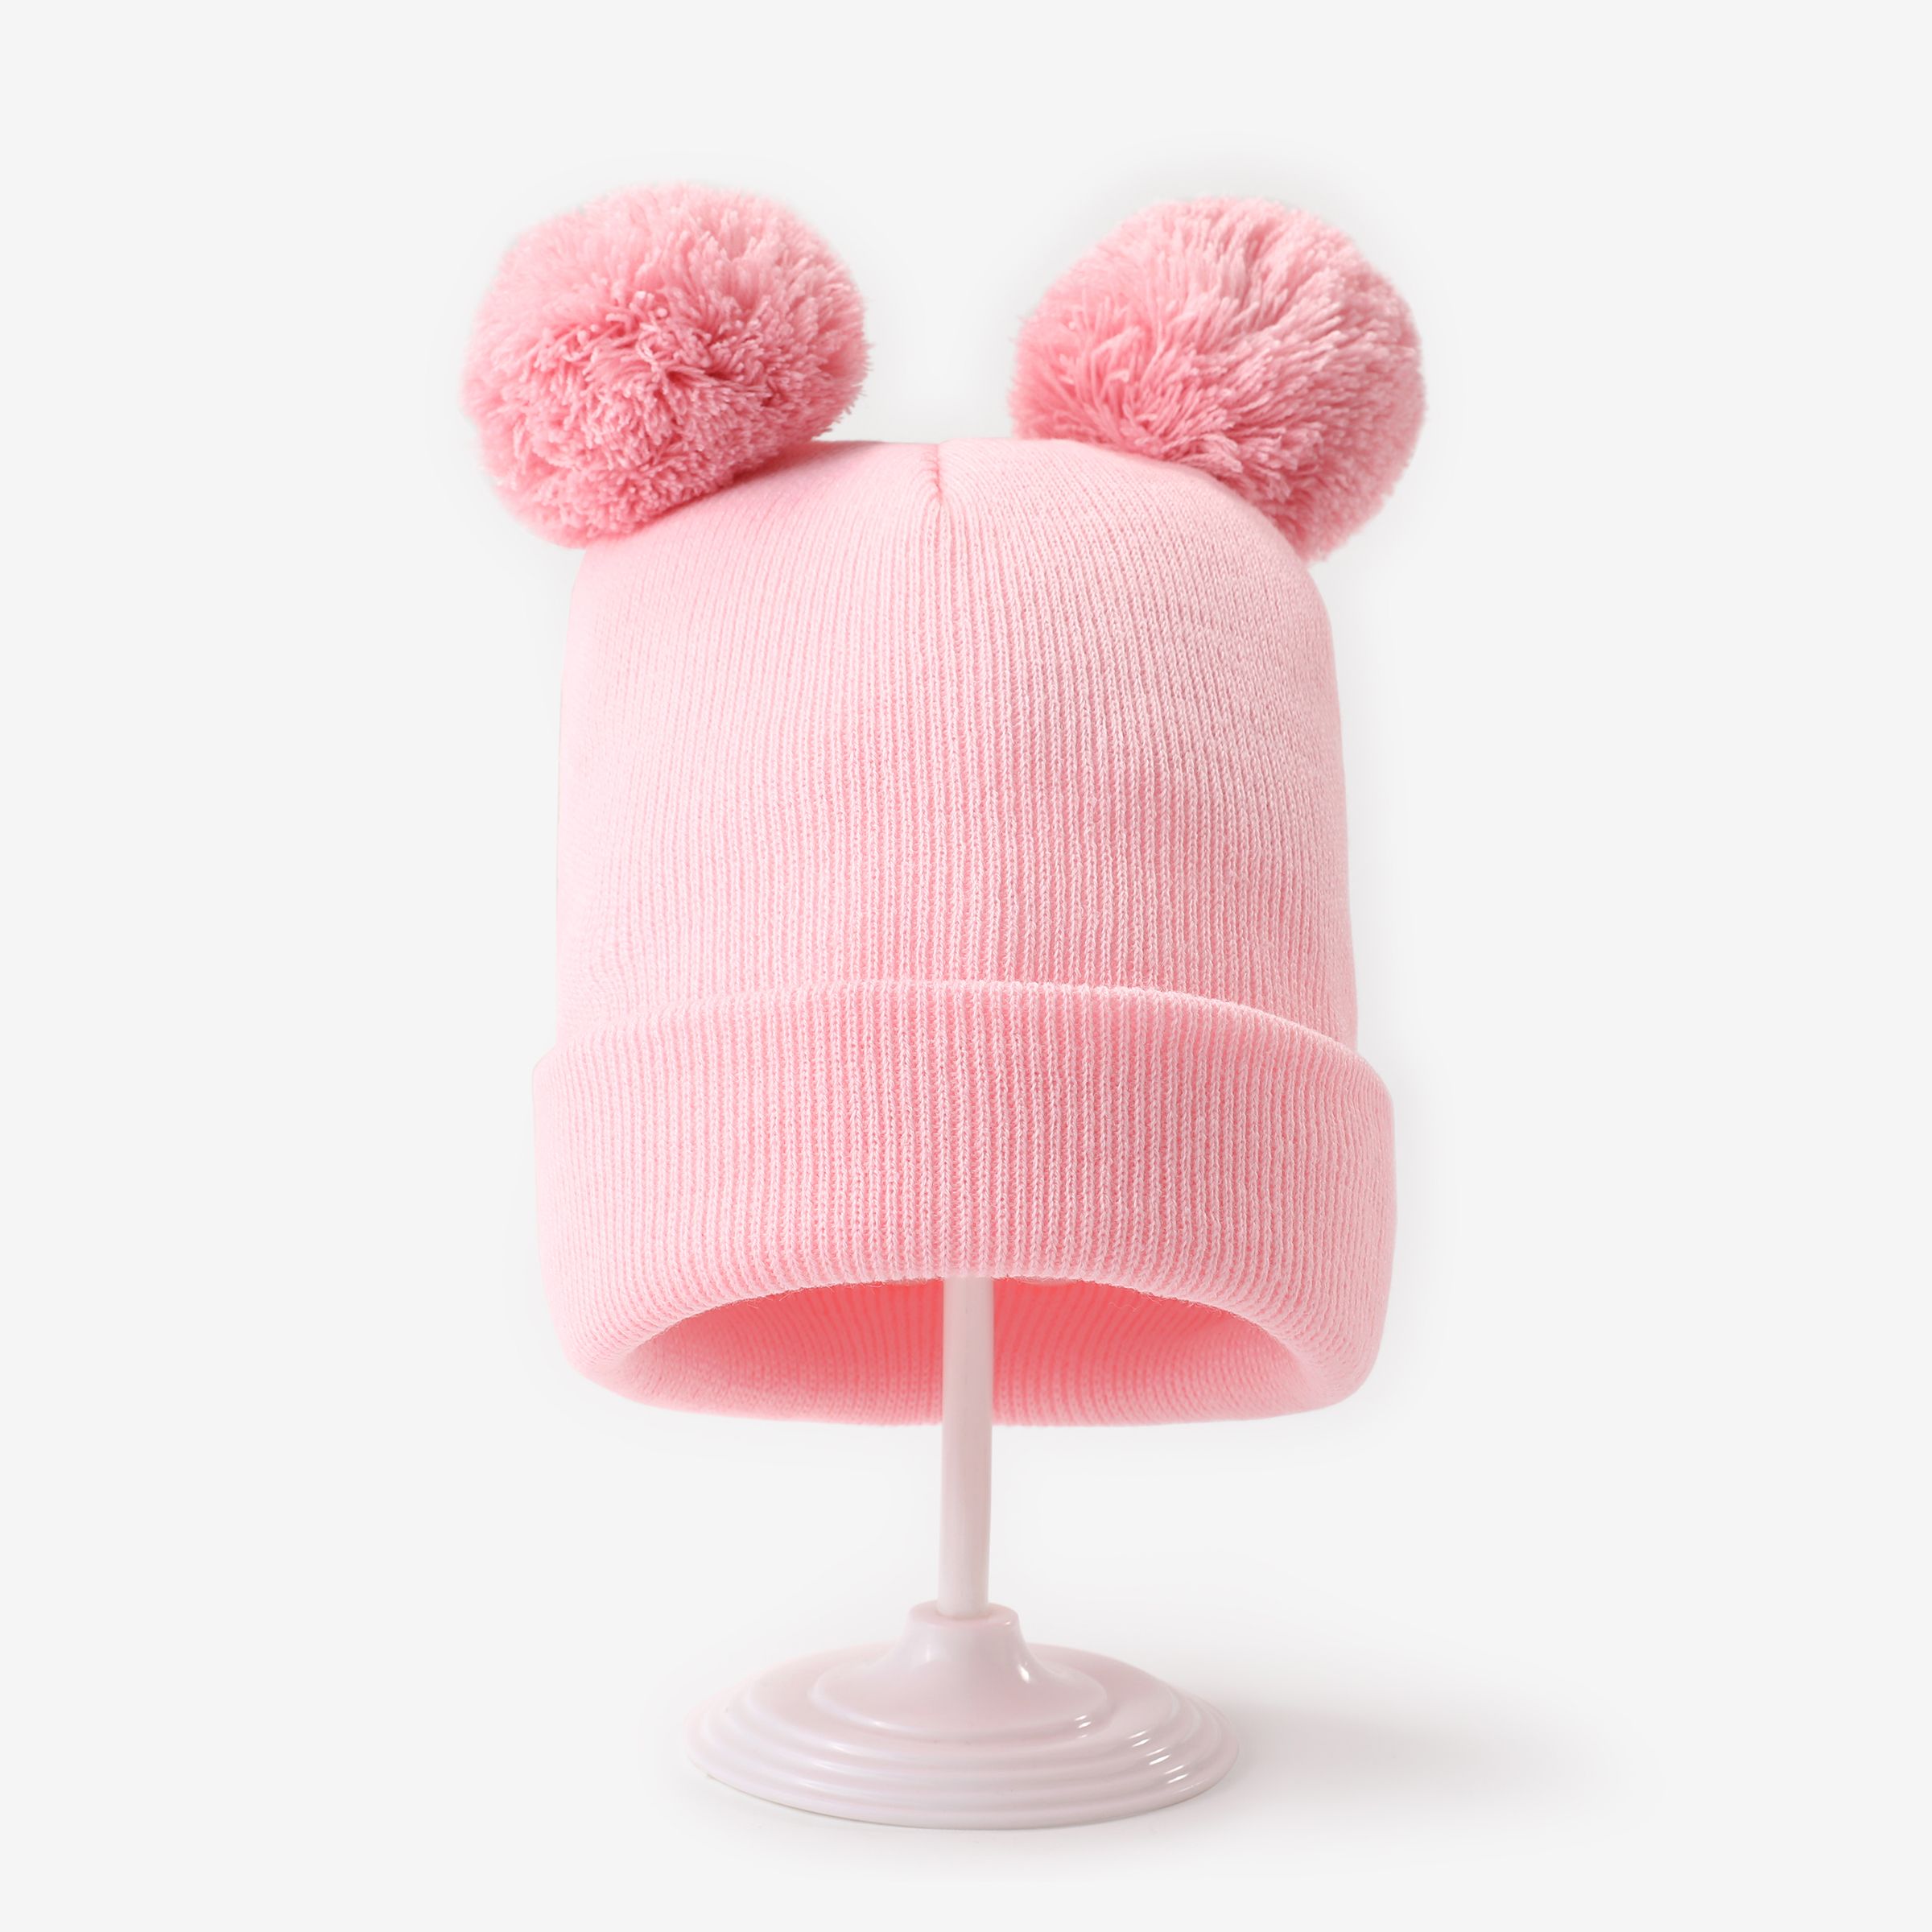 Baby/toddler knitted hat warm fur ball hat